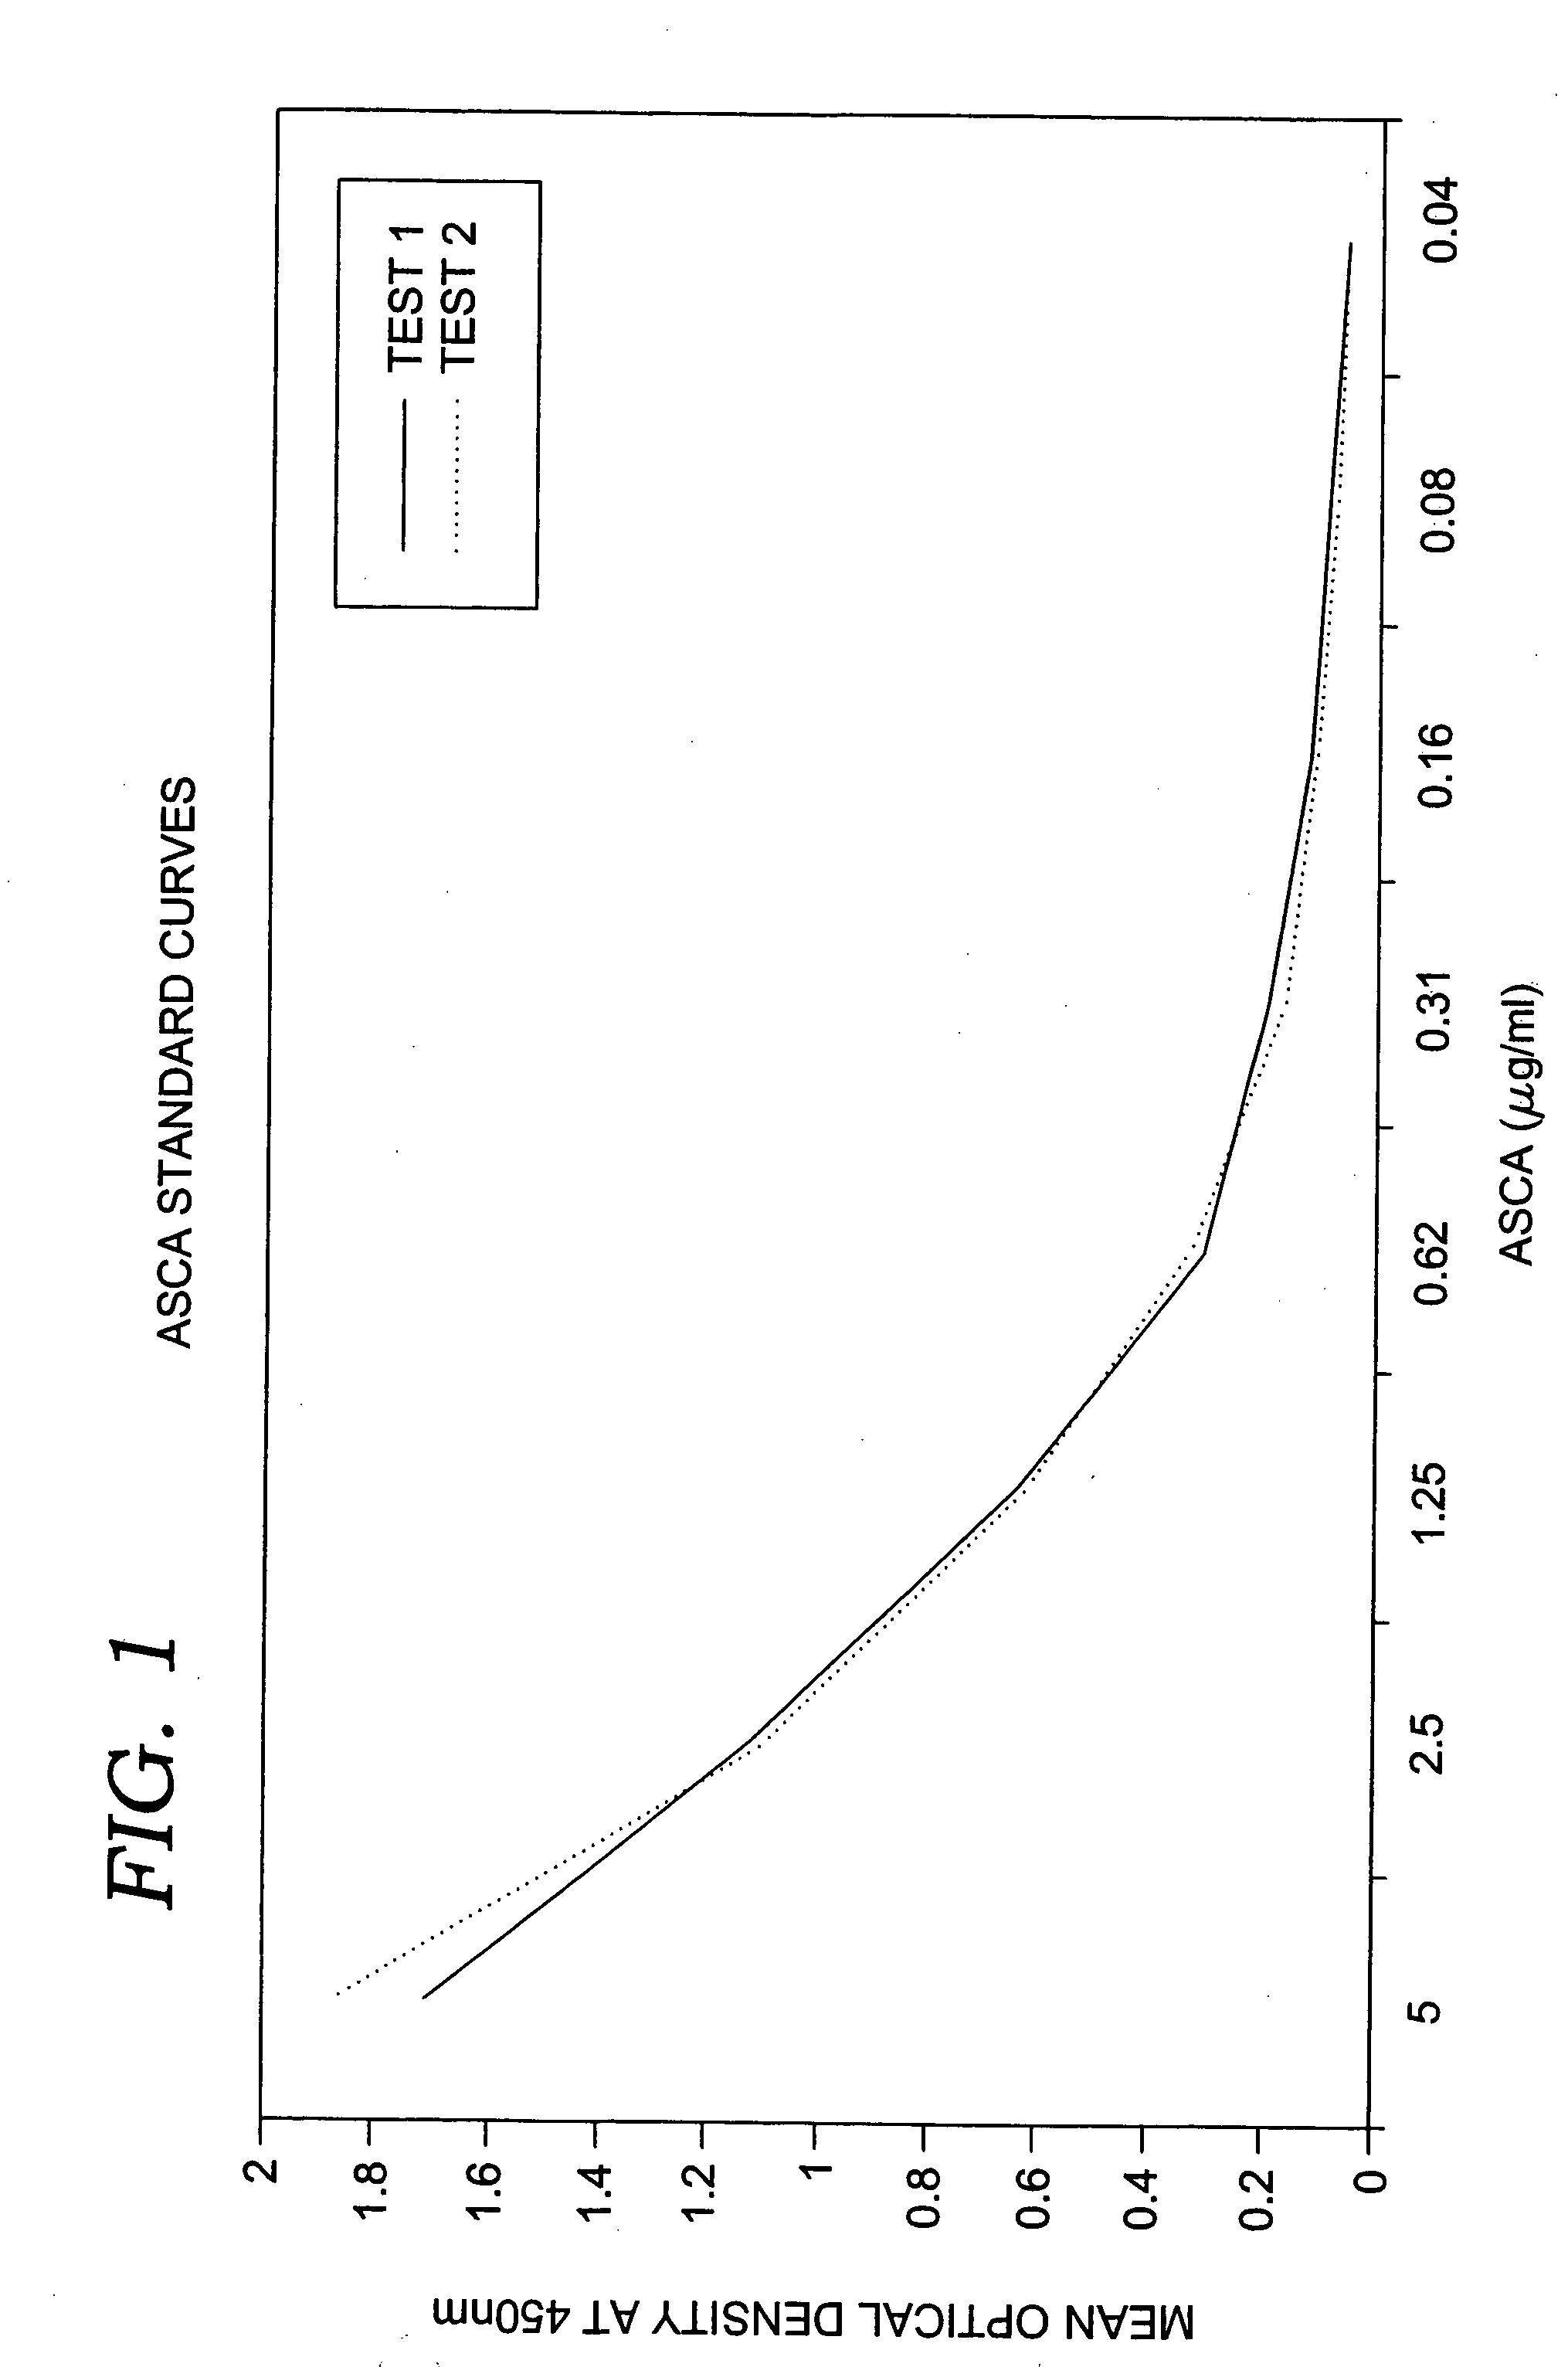 Method and apparatus for distinguishing Crohn's disease from ulcerative colitis and other gastrointestinal diseases by detecting the presence of fecal antibodies to Saccharomyces cerevisiae